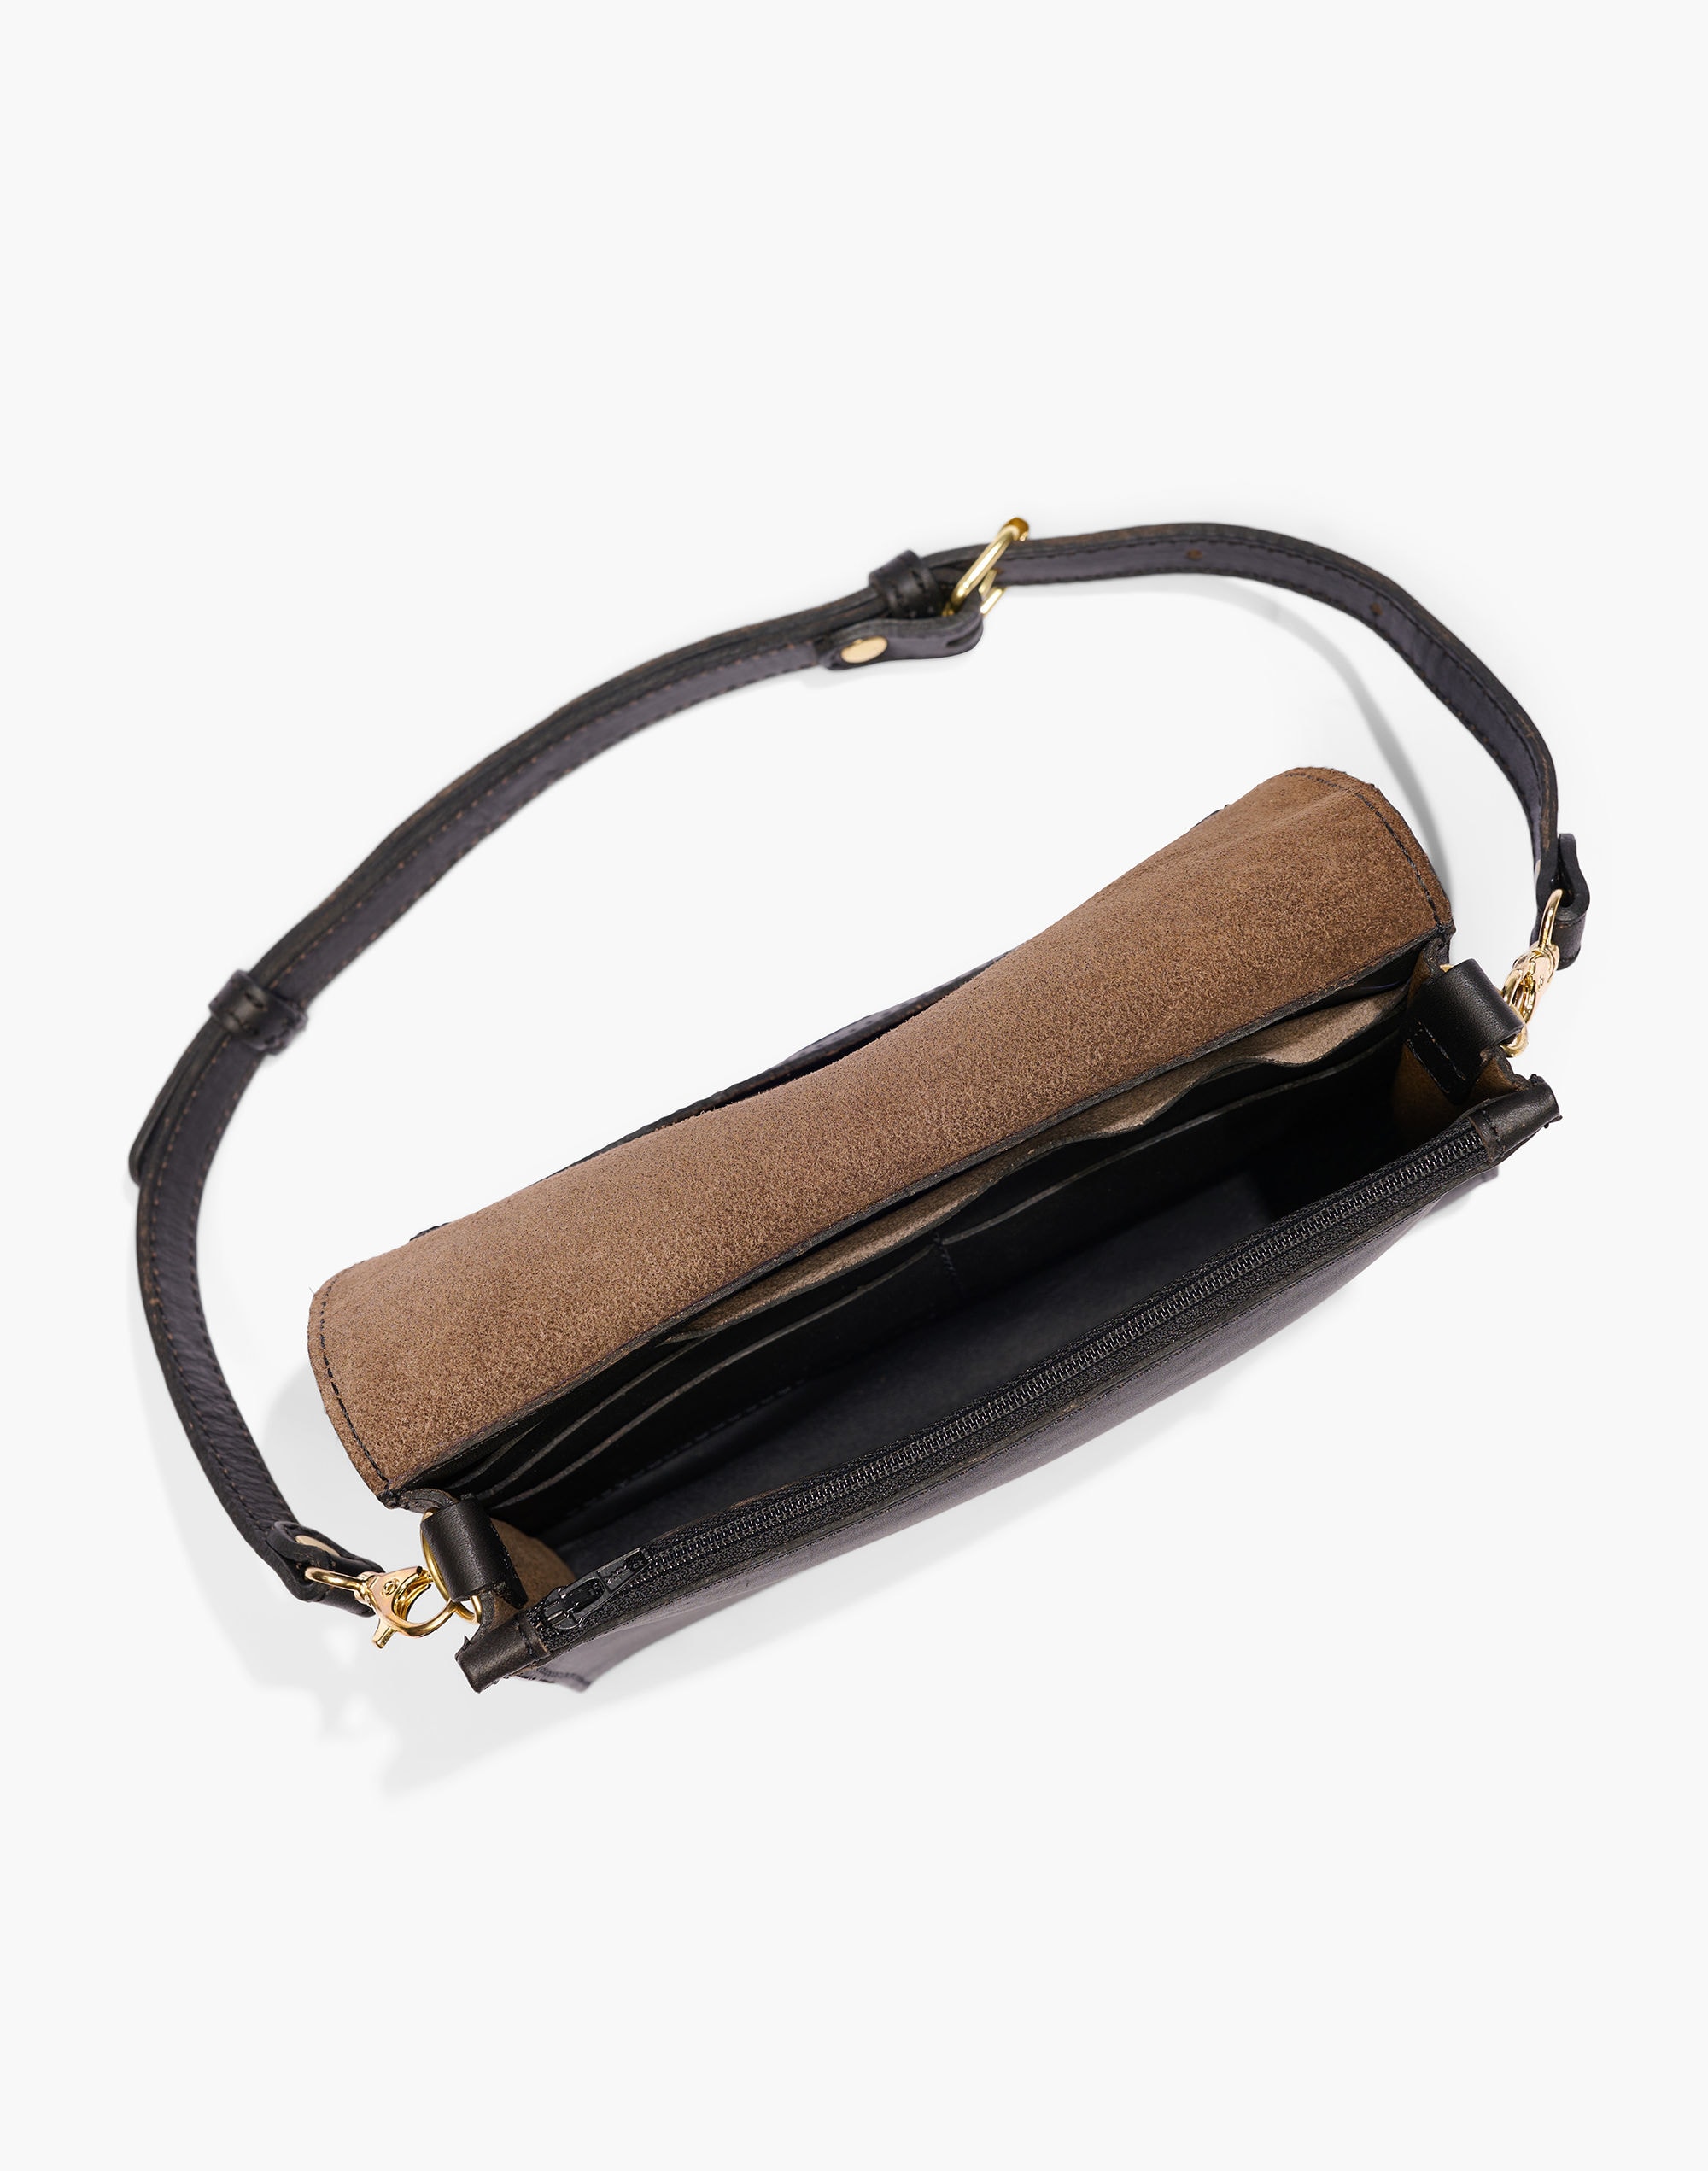 Cleo Convertible Crossbody, Ethically Made